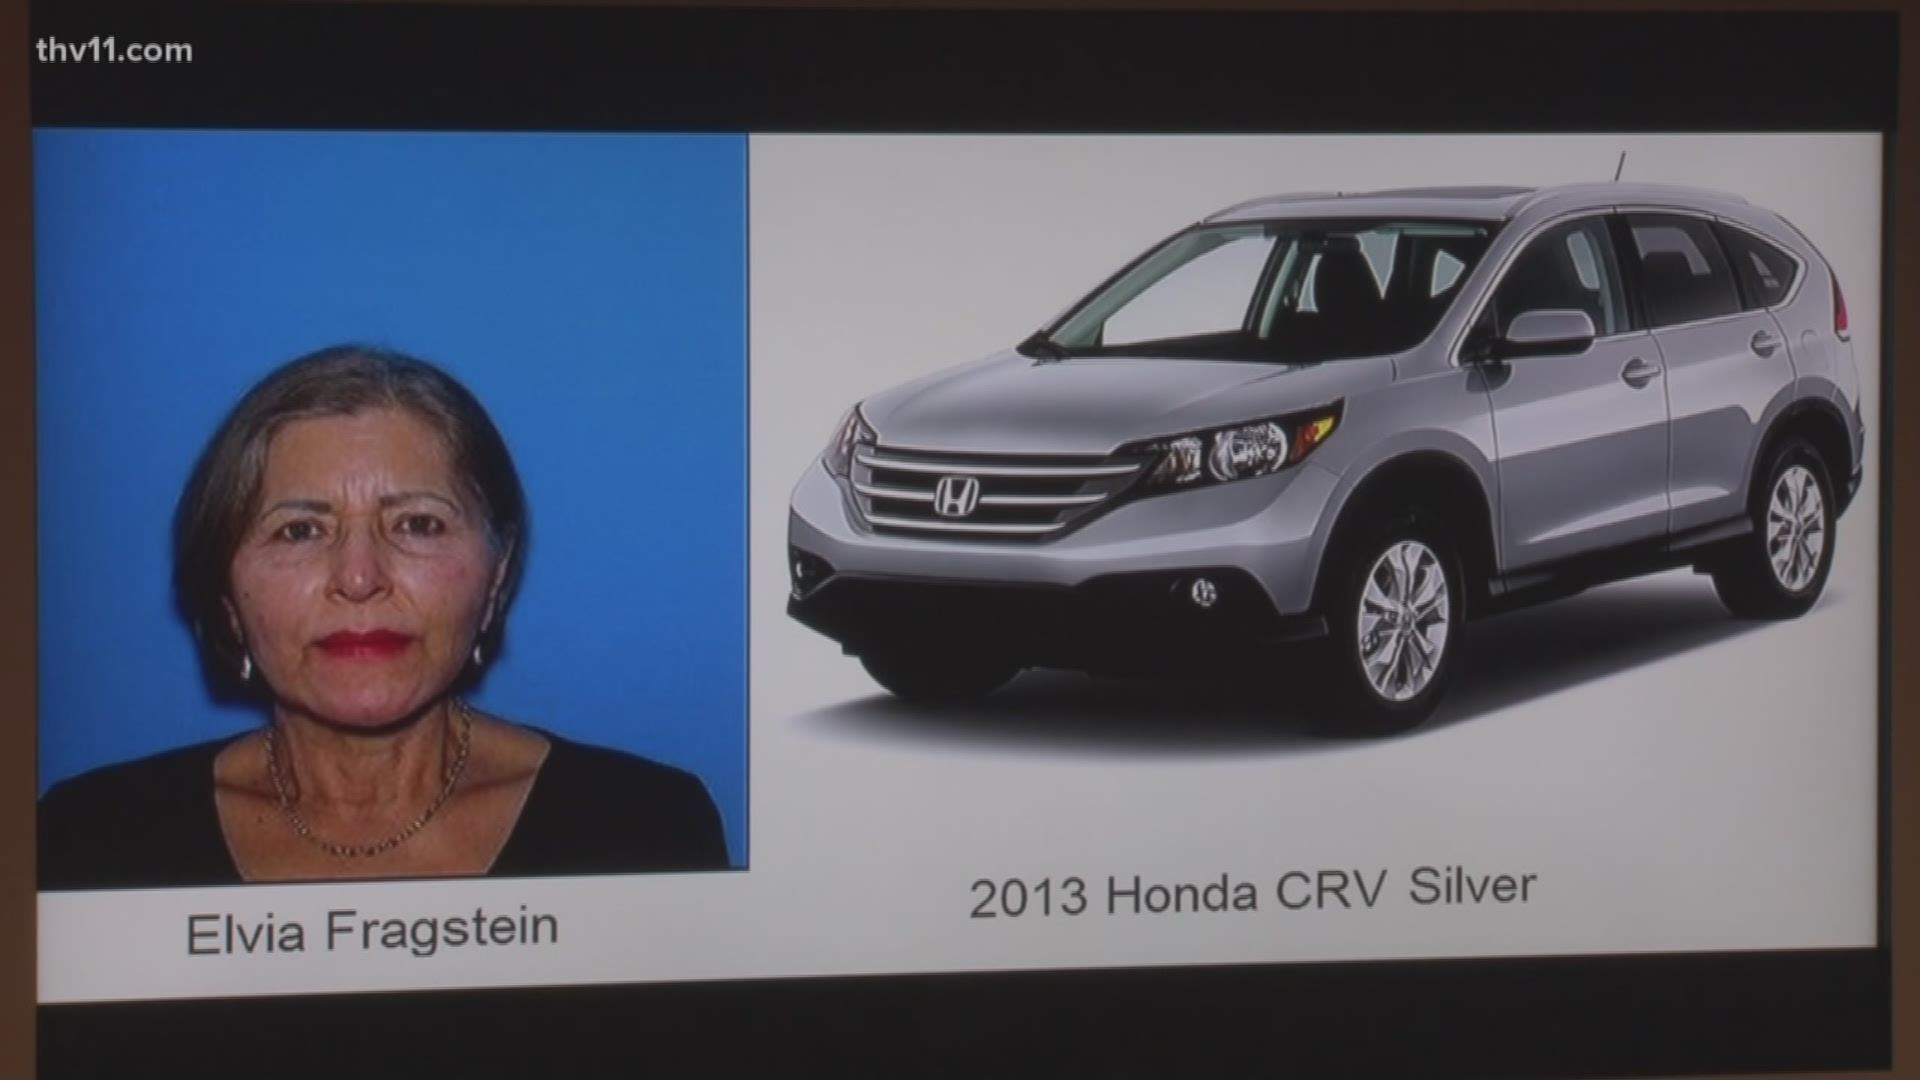 Authorities believe 71-year-old Elvia Fragstein was murdered and her body was left in Jefferson County.